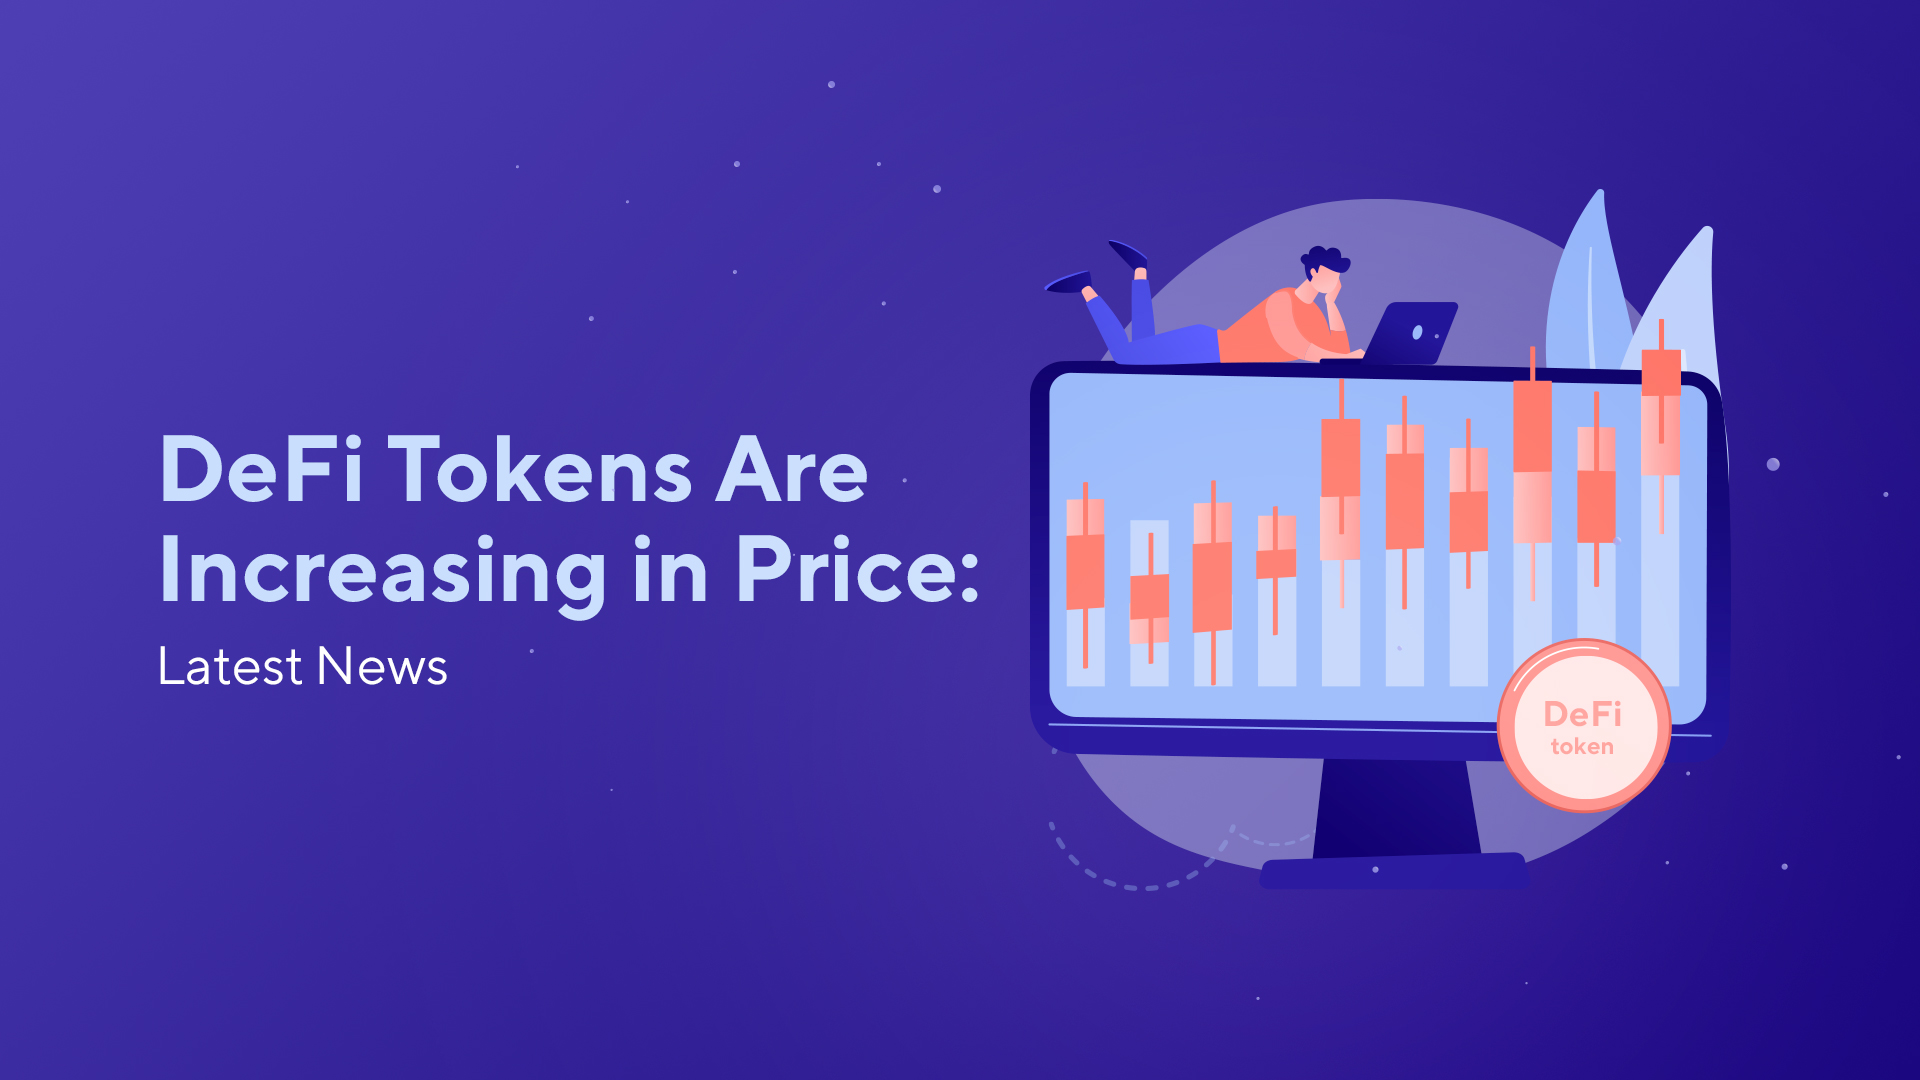 DeFi‌ ‌Tokens‌ ‌Are‌ ‌Increasing‌ ‌in‌ ‌Price:‌ ‌Latest‌ ‌News‌